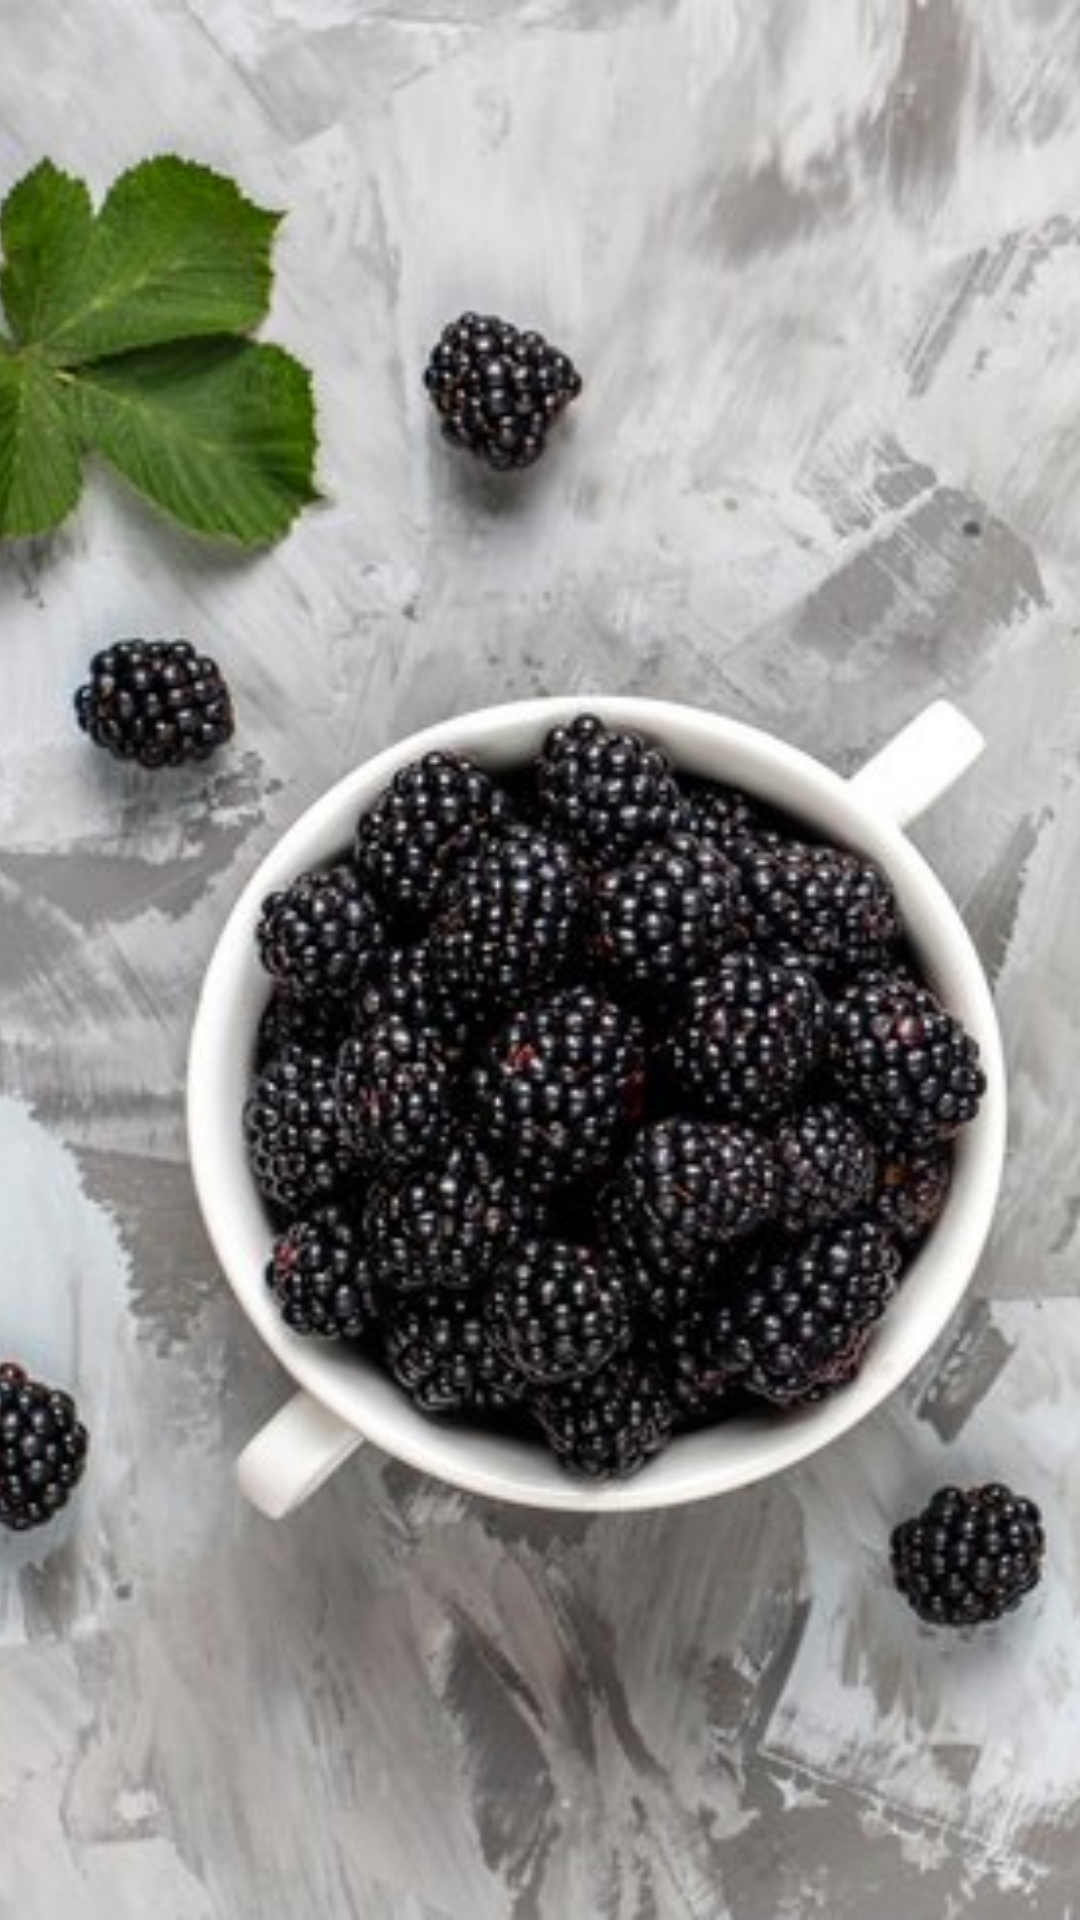 Check 5 benefits of blackberries to improve your health 